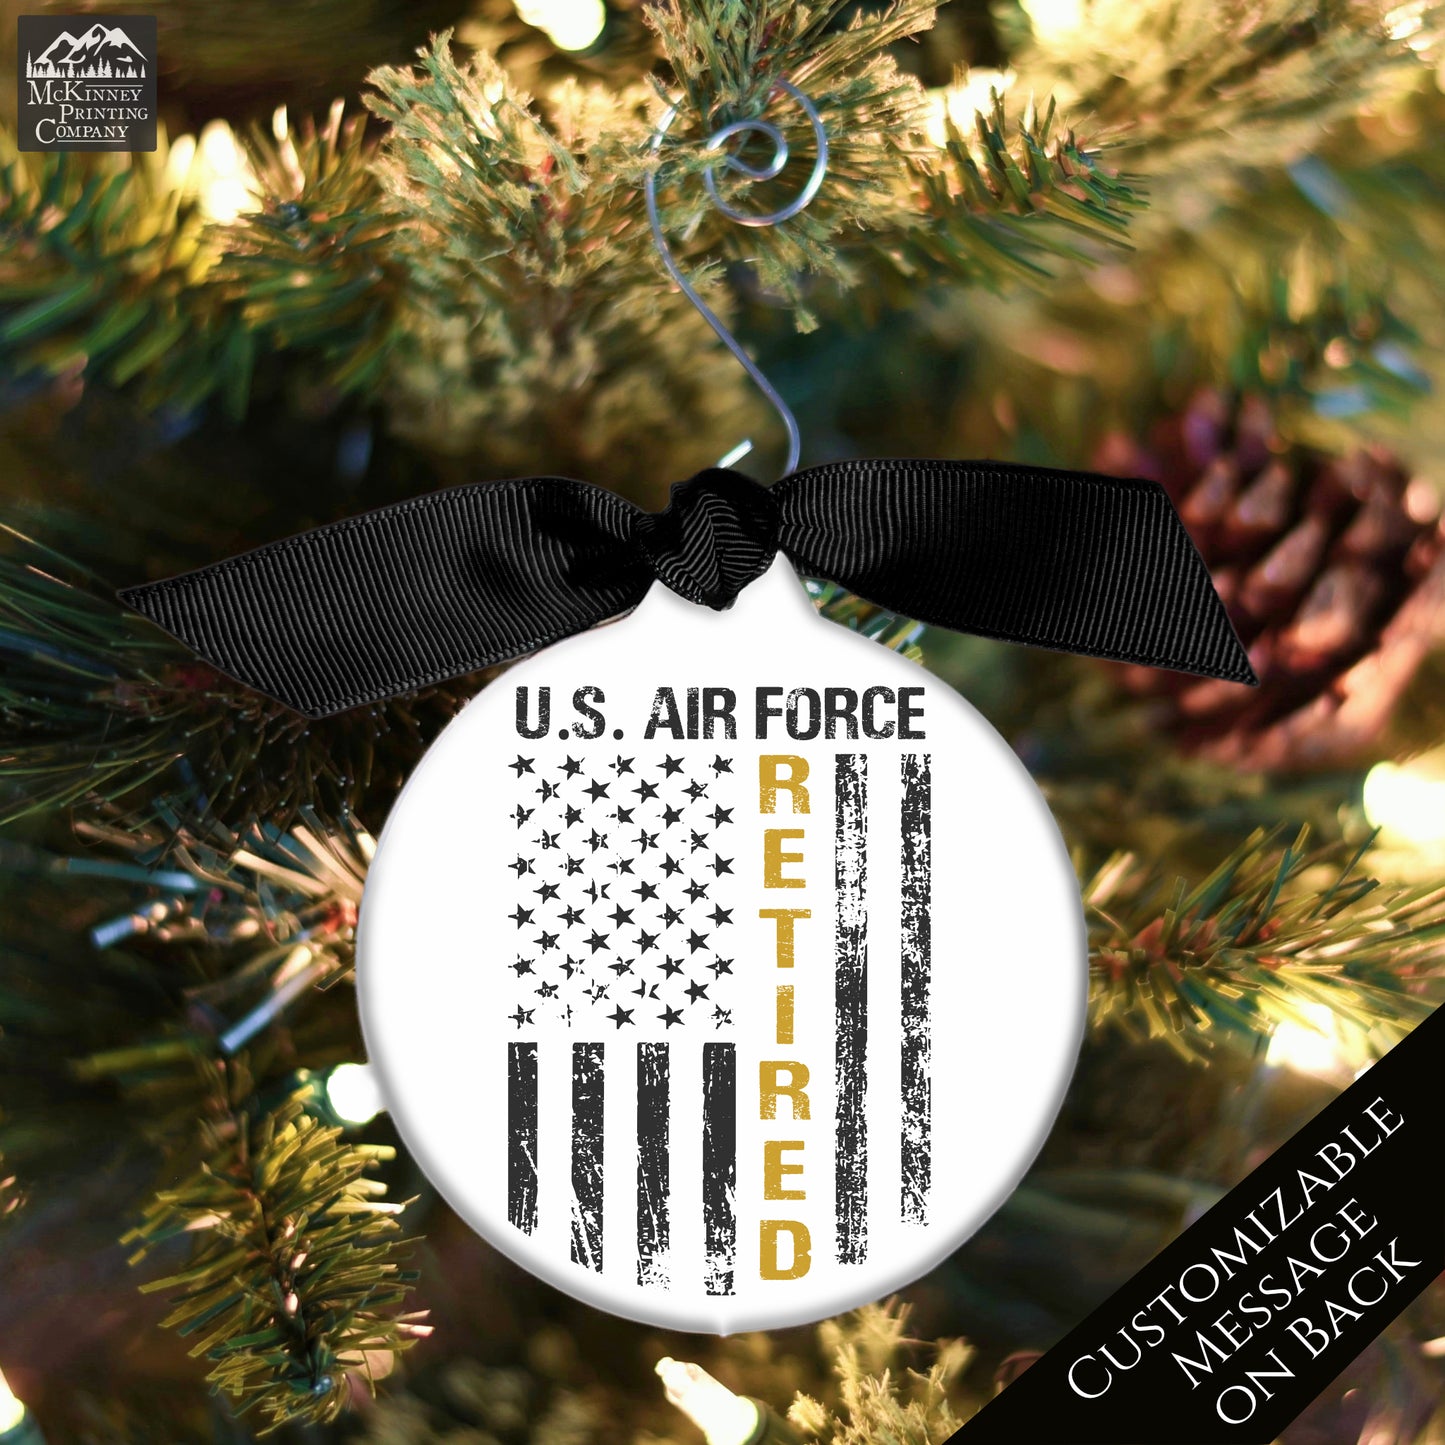 Air Force Ornament - Military, Christmas, Veteran, USAF, Retired, Gift